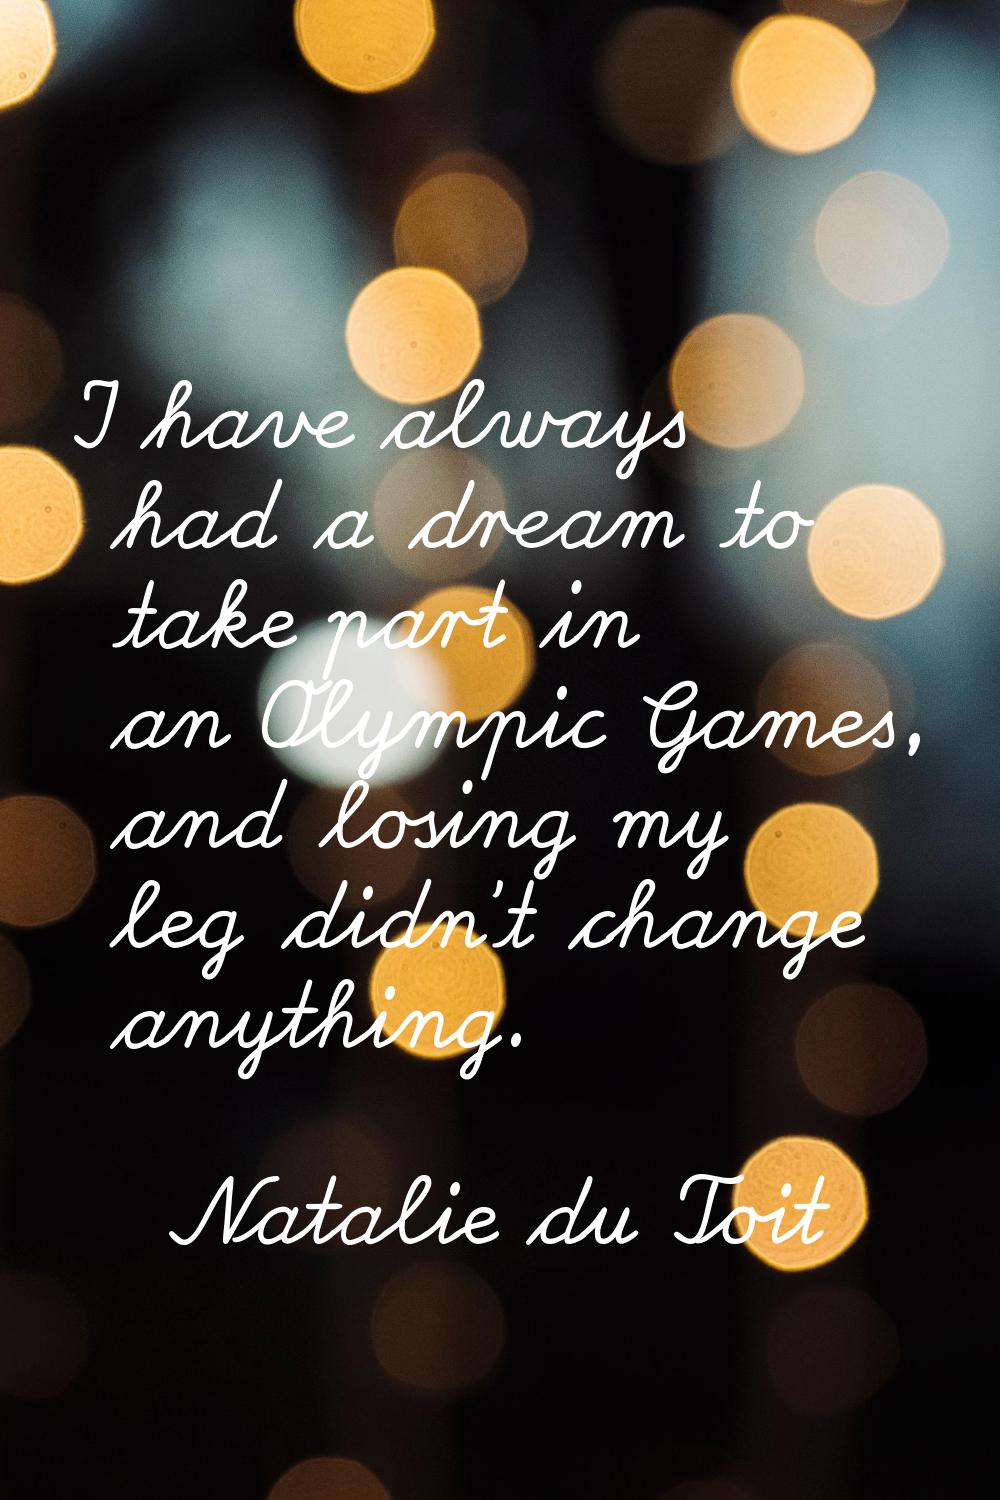 I have always had a dream to take part in an Olympic Games, and losing my leg didn't change anythin